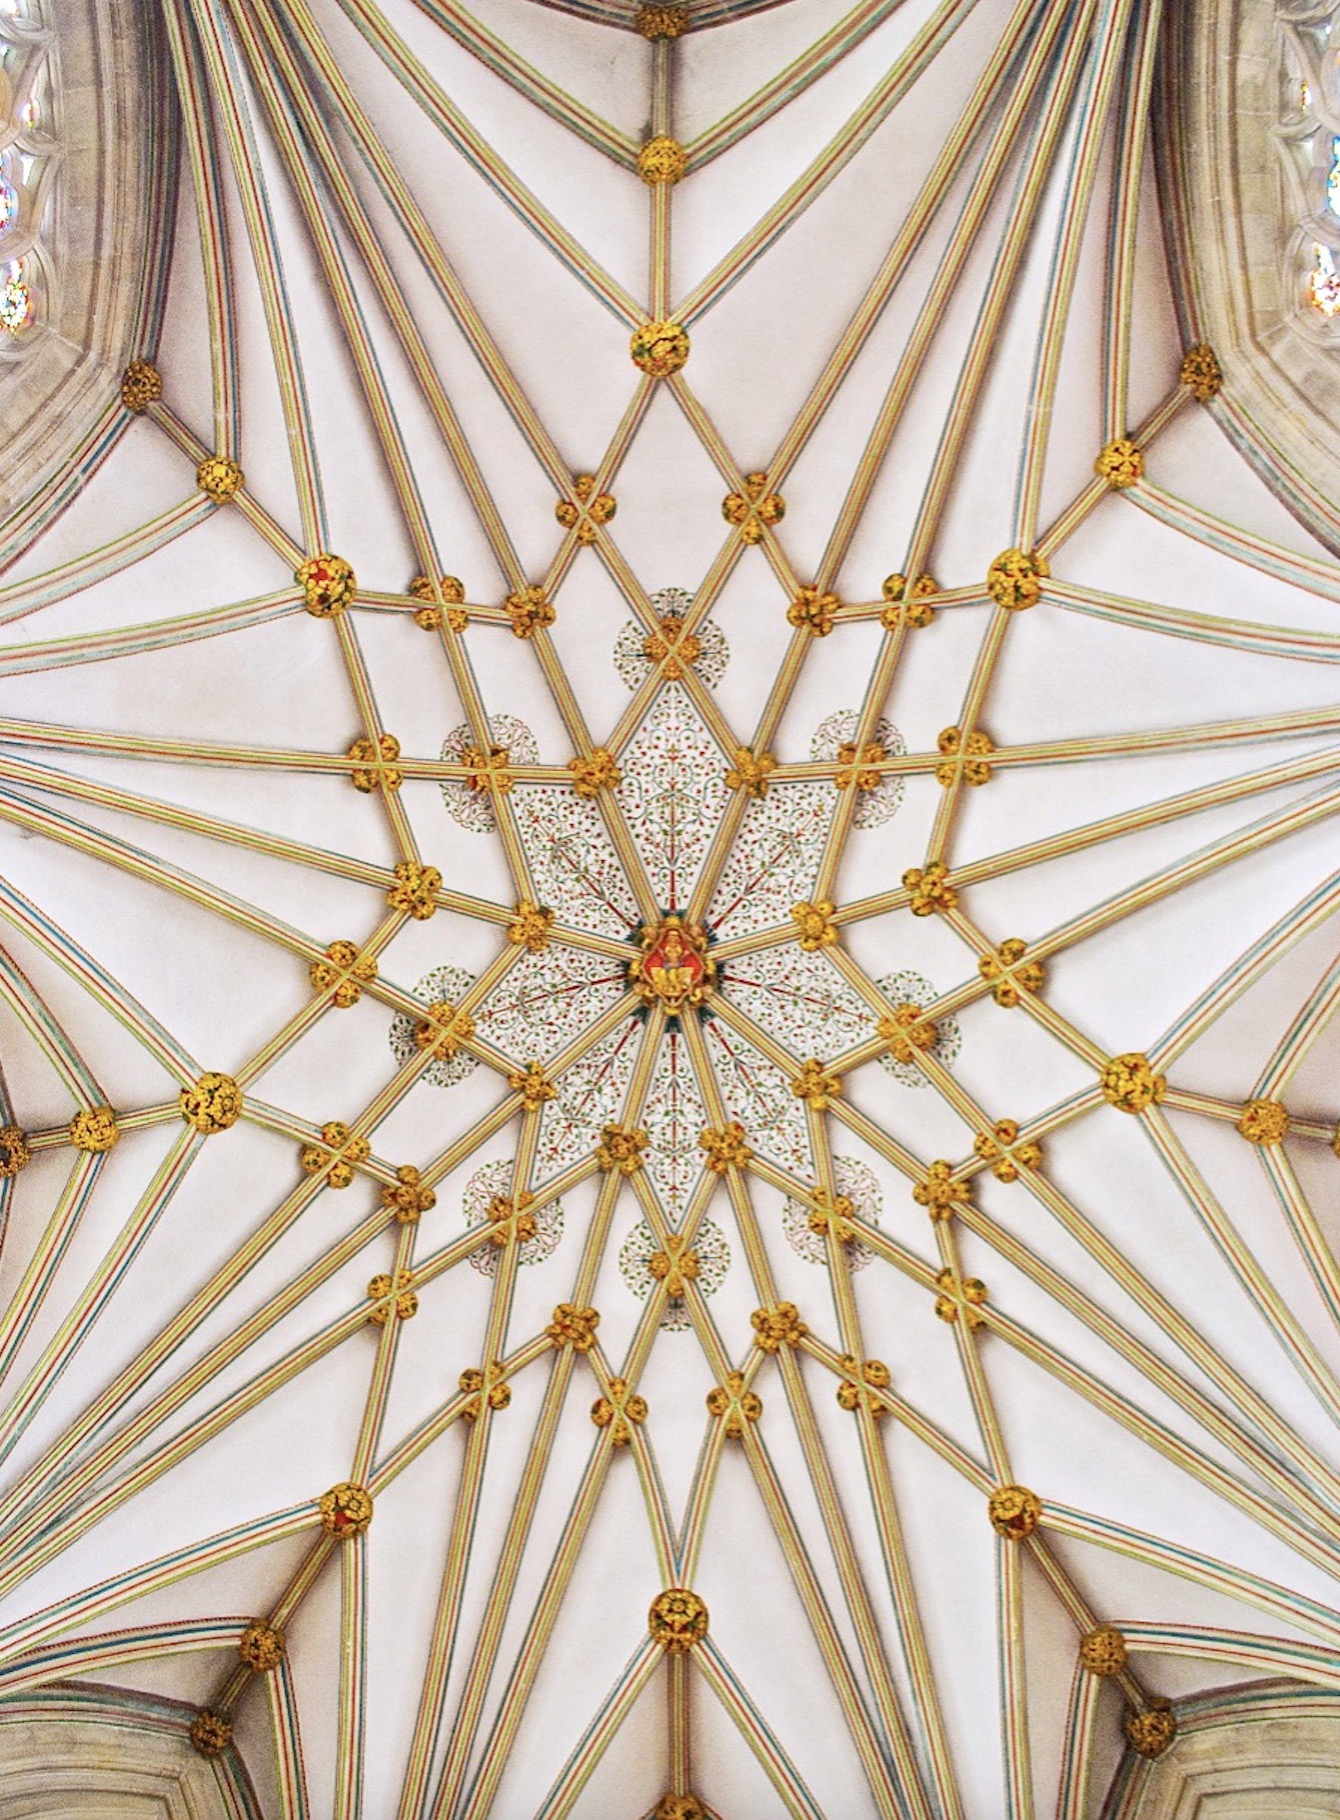 Wells Cathedral Ceiling - Always Look Up